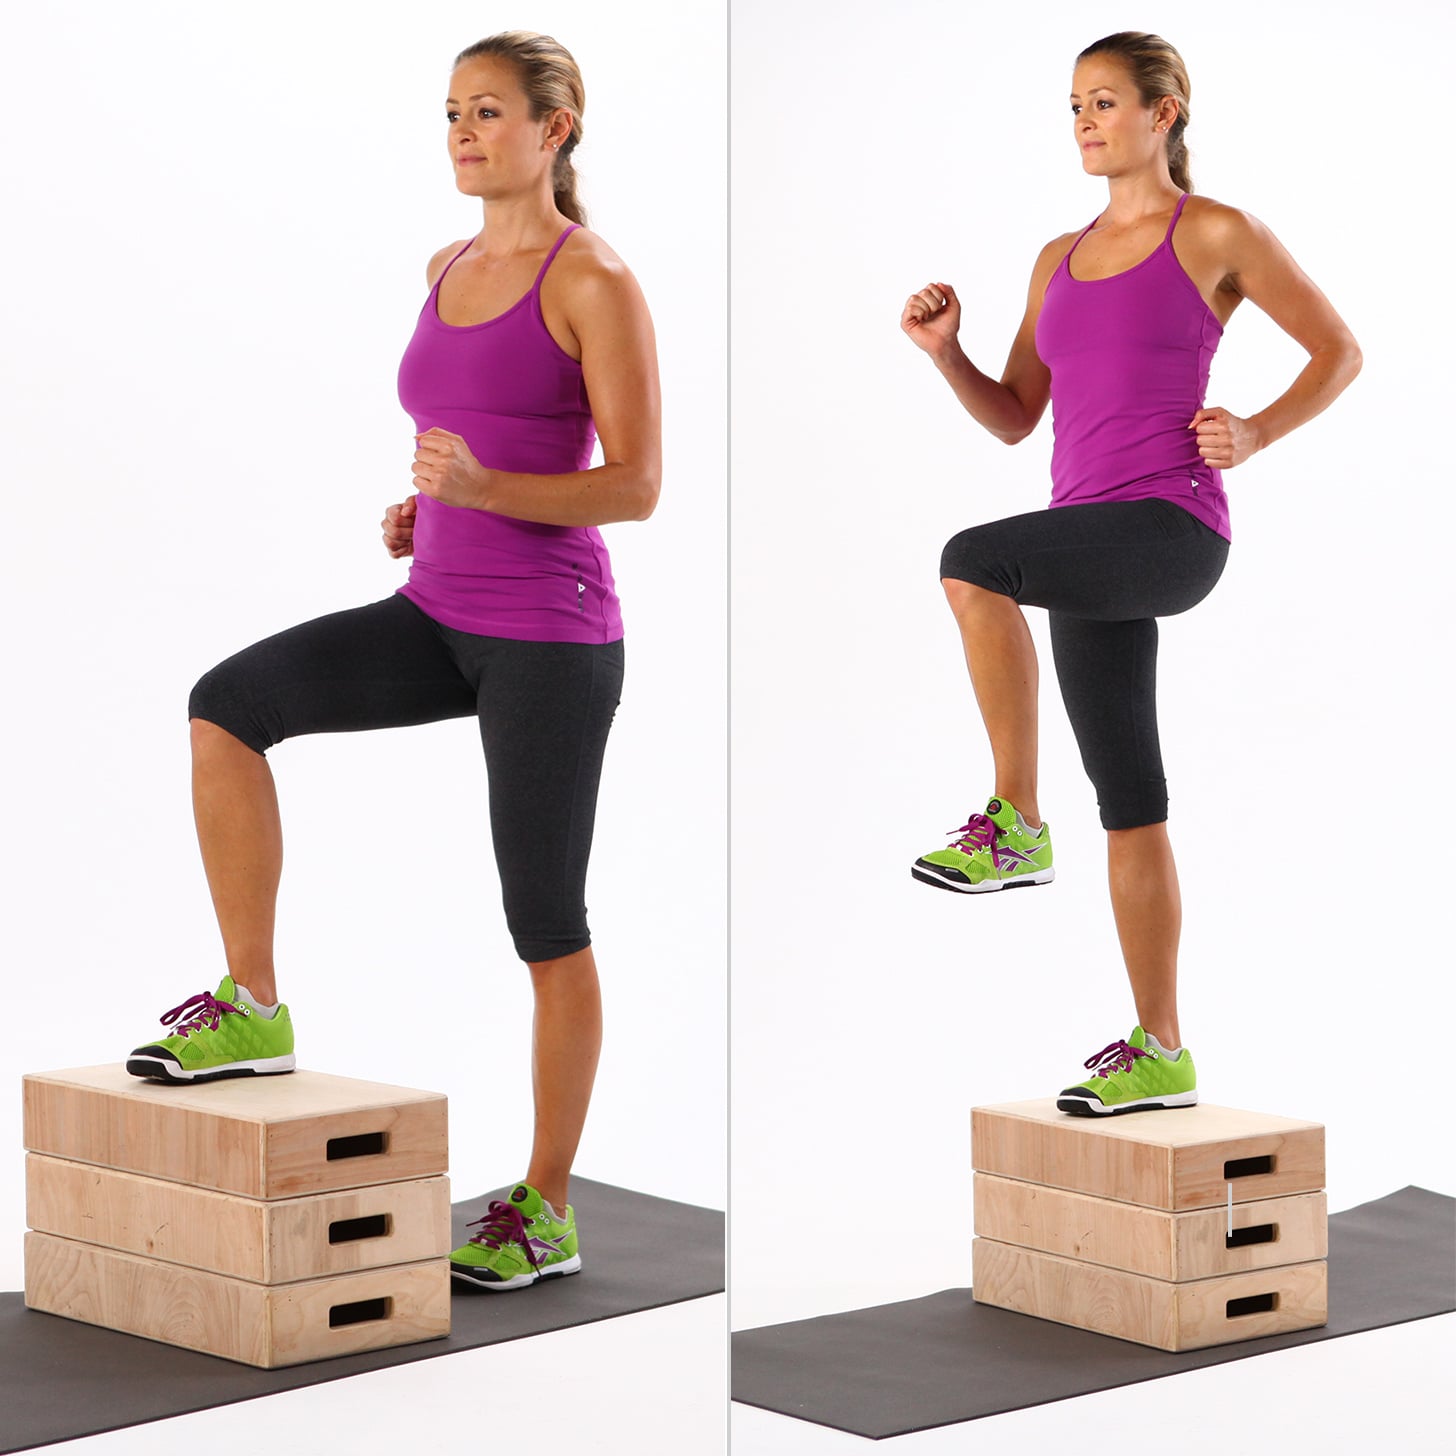 Why You Shouldn't Do Box Jumps in Workouts and 3 Alternatives